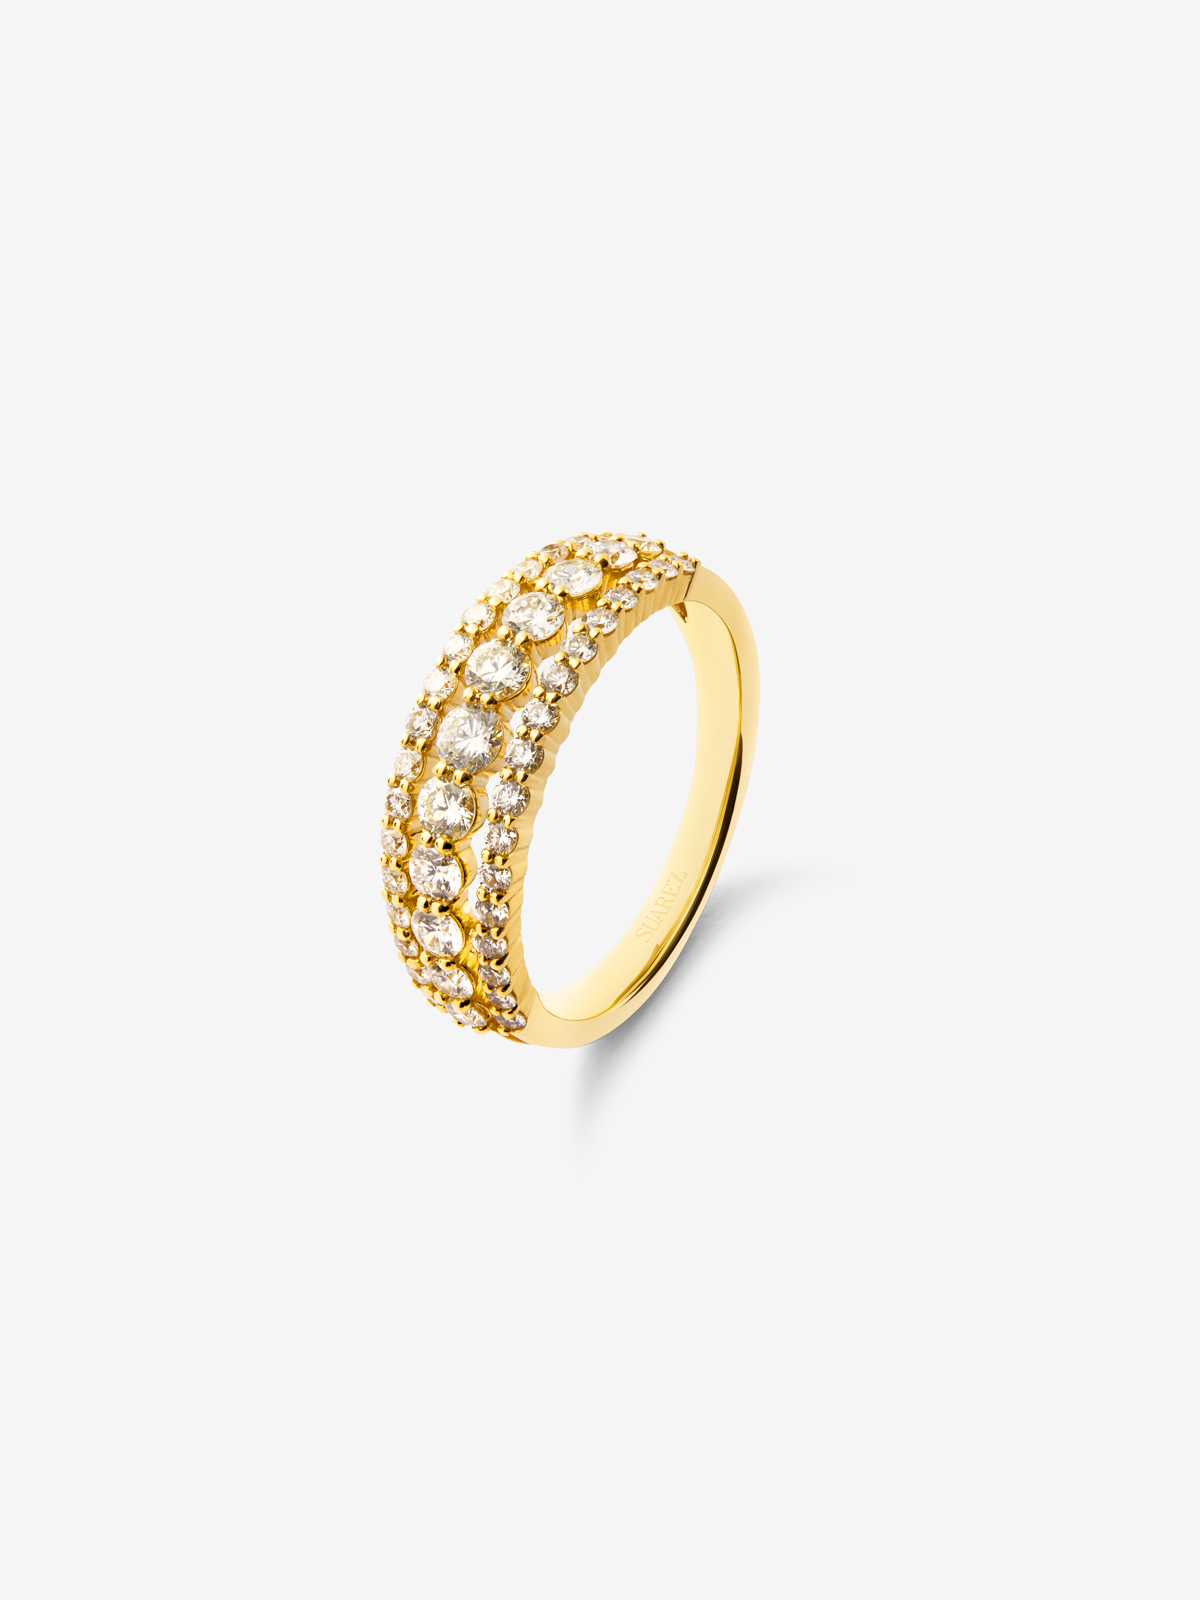 Triple Yellow Gold Ring of 18K with white diamonds in 0.97 cts